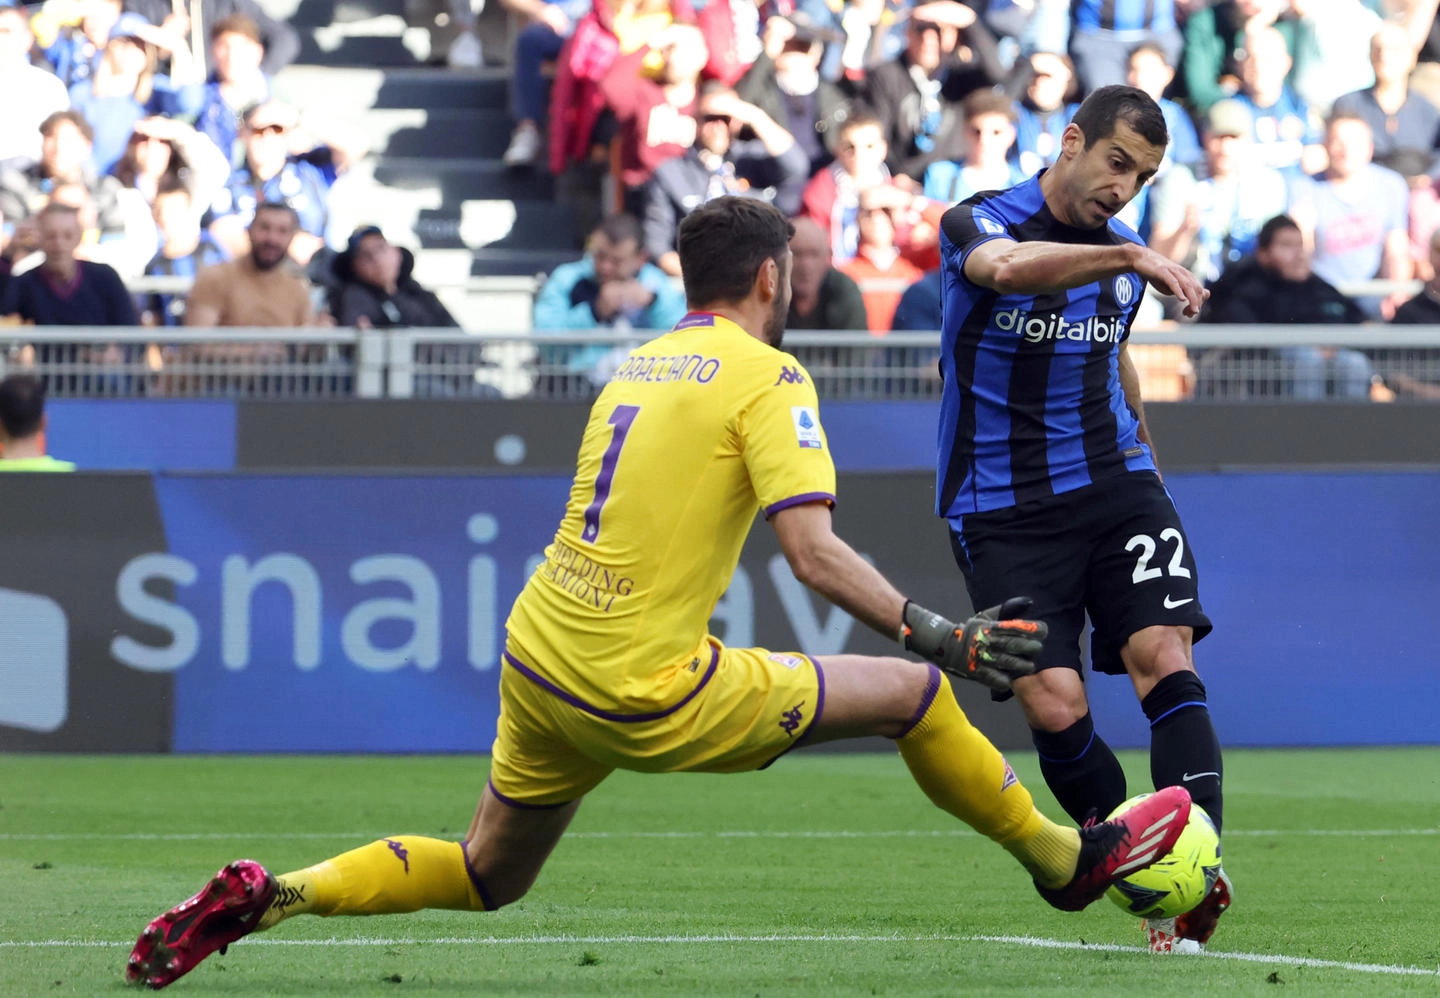 Fiorentina�s goalkeeper Pietro Terracciano (L) challenges for the ball  Inter Milan�s Henrih Mkhitaryan during the Italian serie A soccer match between Fc Inter  and Fiorentina Giuseppe Meazza stadium in Milan, 1 April  2023.ANSA / MATTEO BAZZI